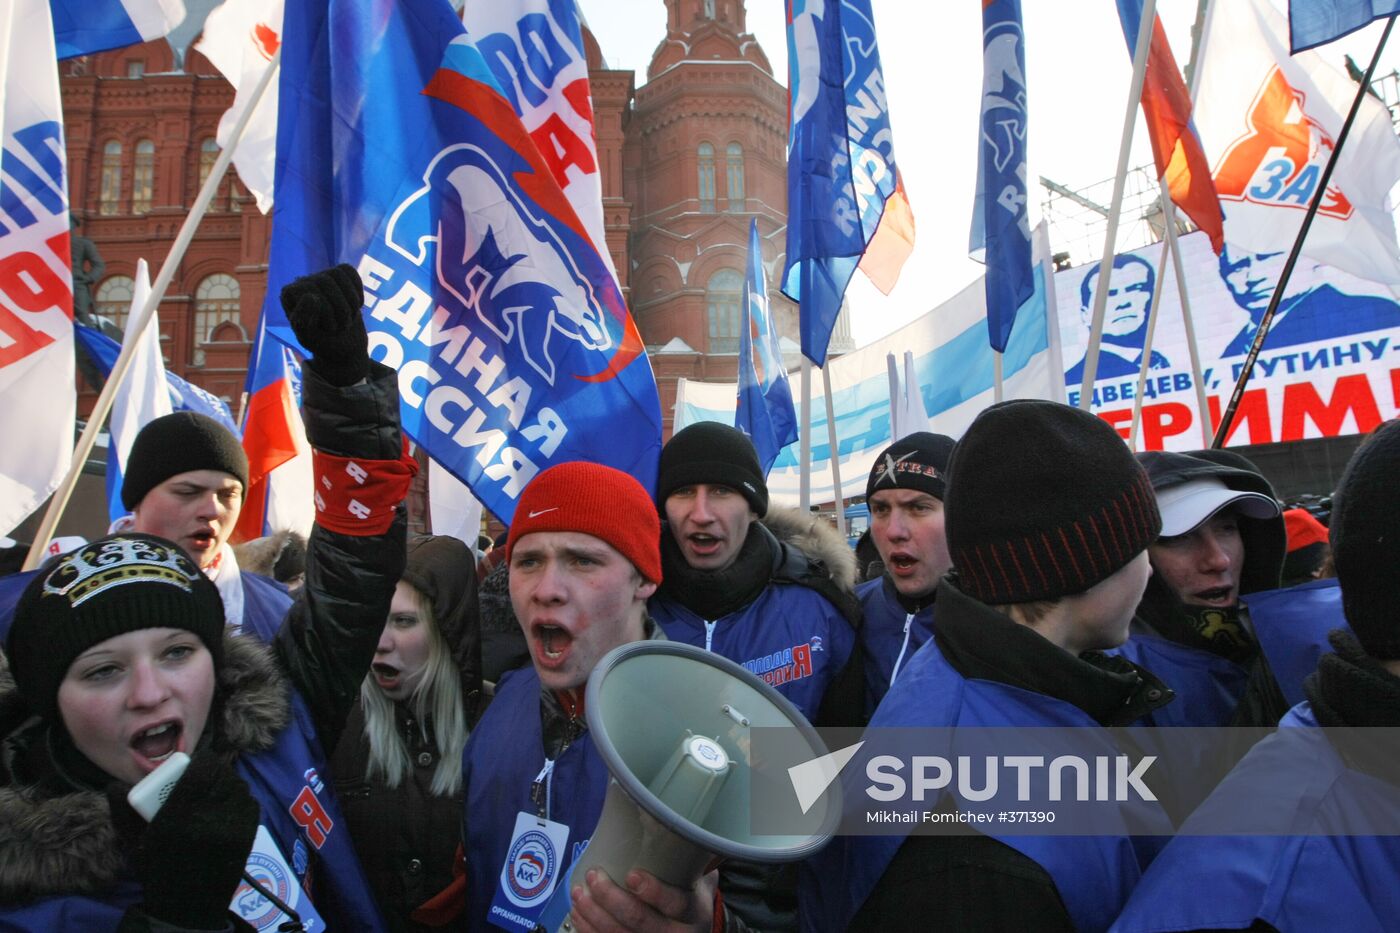 Rally in Moscow "People! Medvedev! Putin! Together we win!"